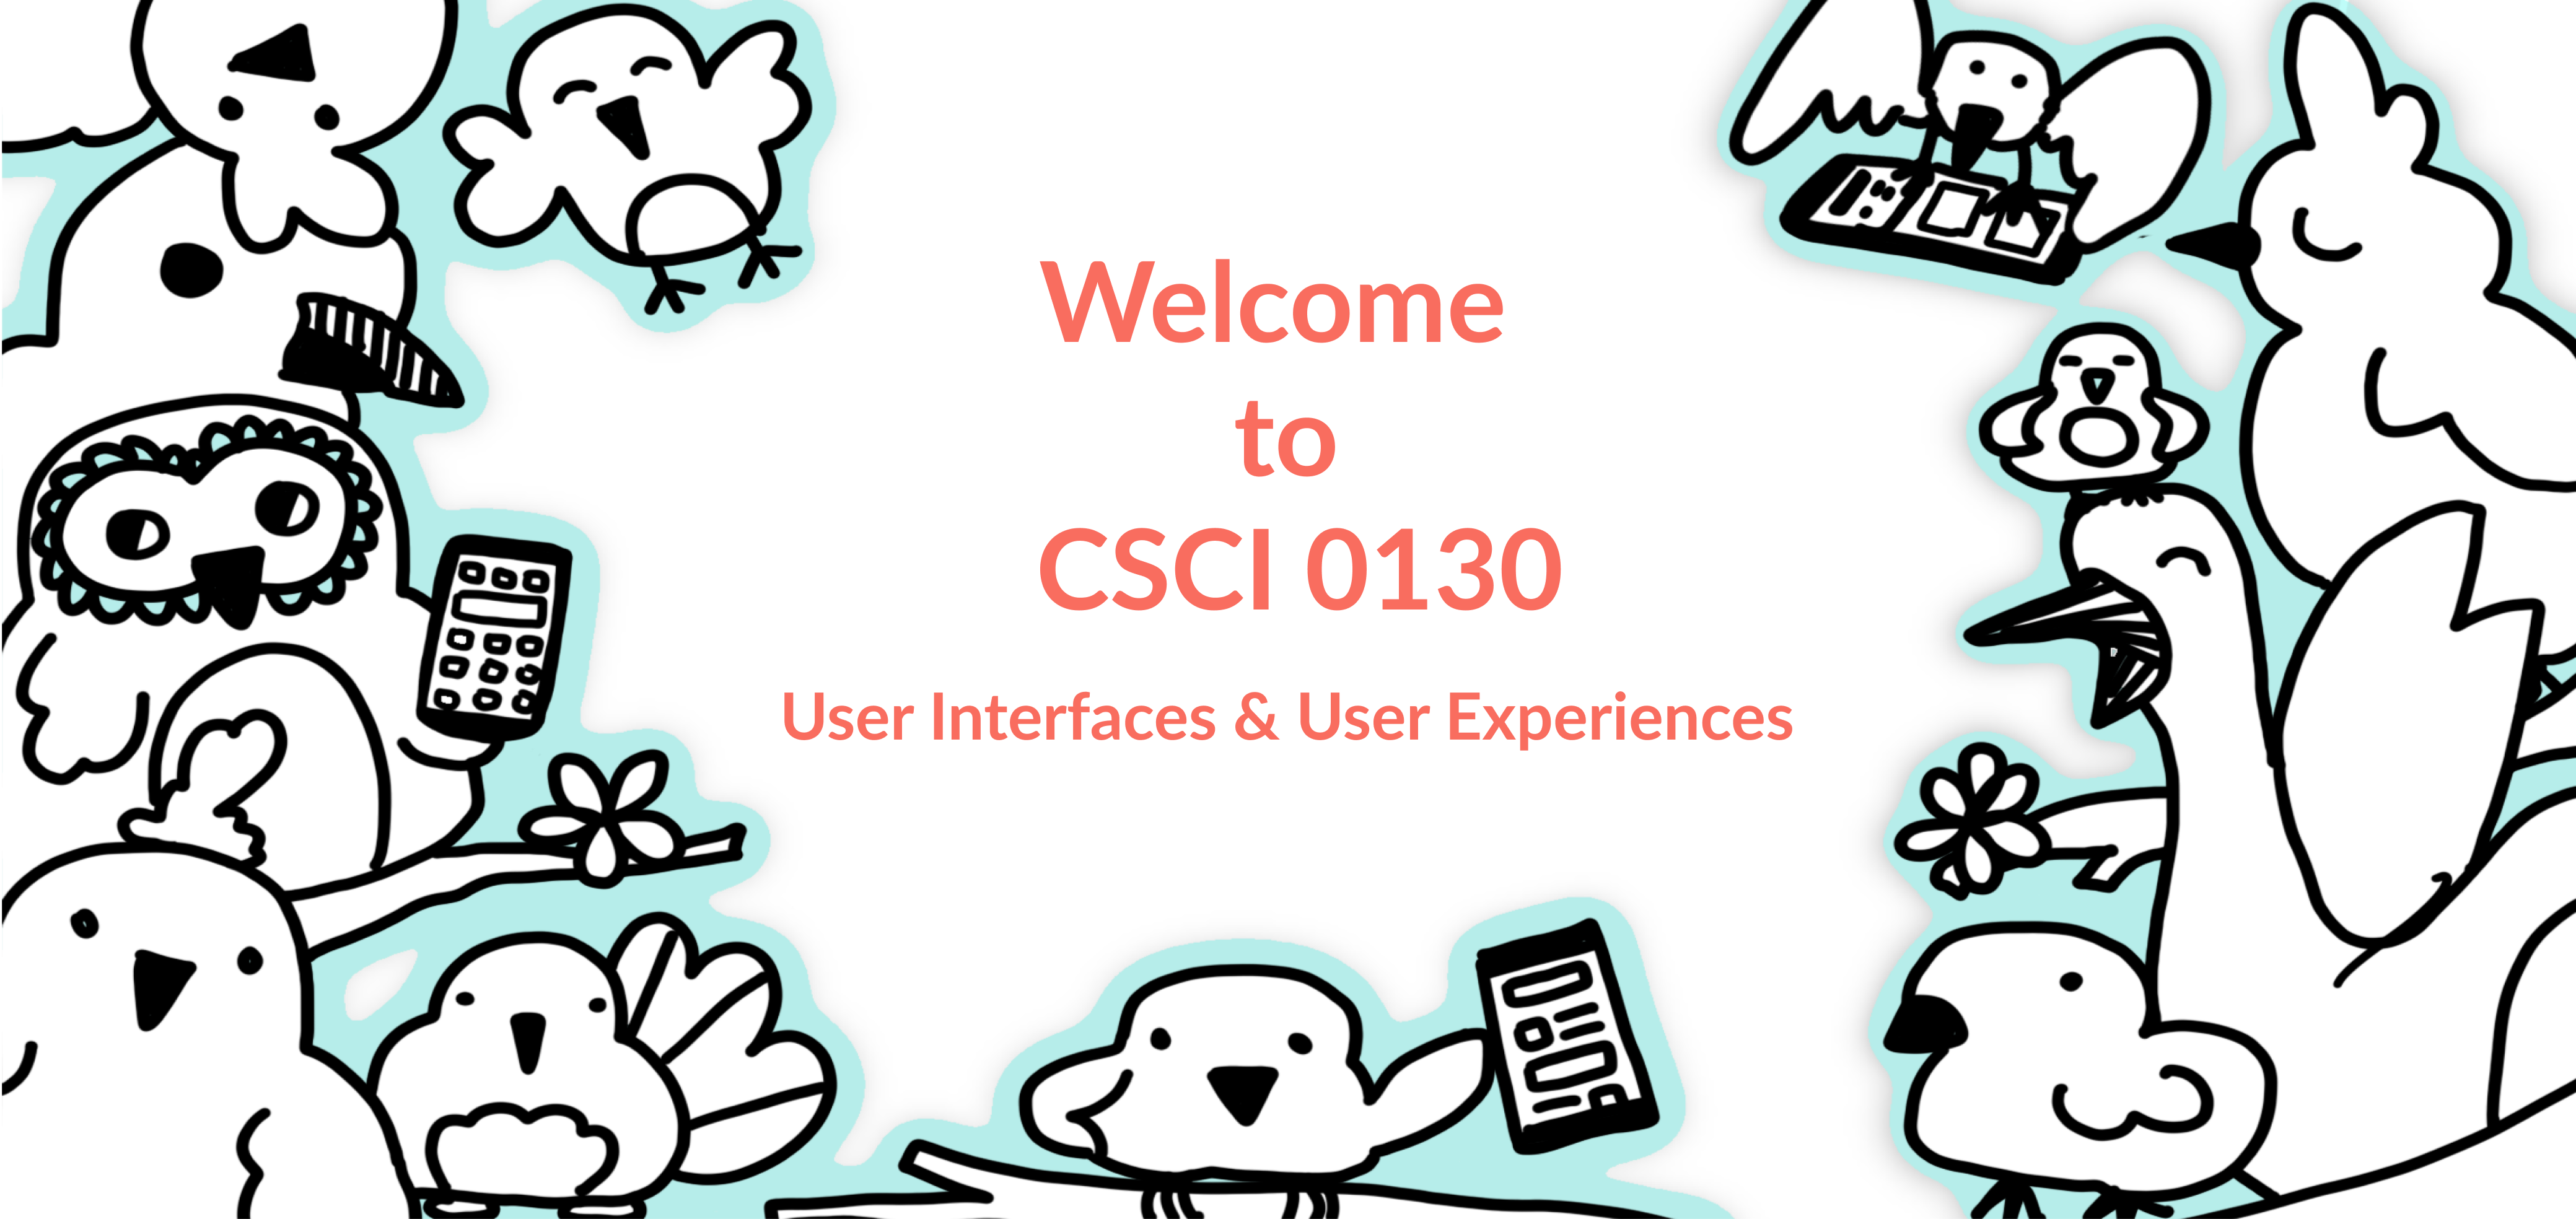 Header image, 'Welcome to CSCI 0130: User Interfaces & User Experiences' surrounded by illustrated birds.